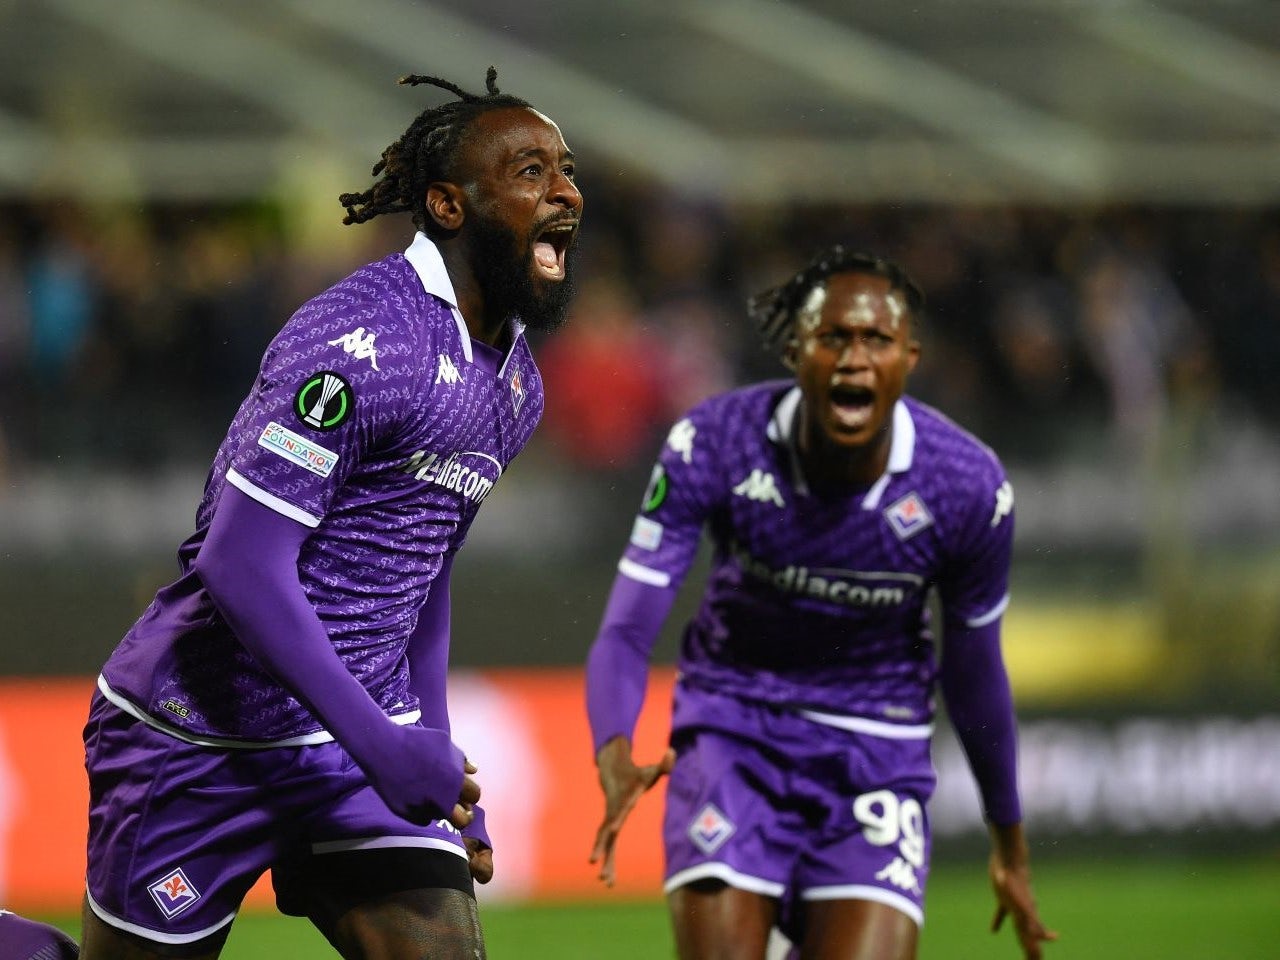 Nzola late winner gives Fiorentina first-leg lead over Club Brugge